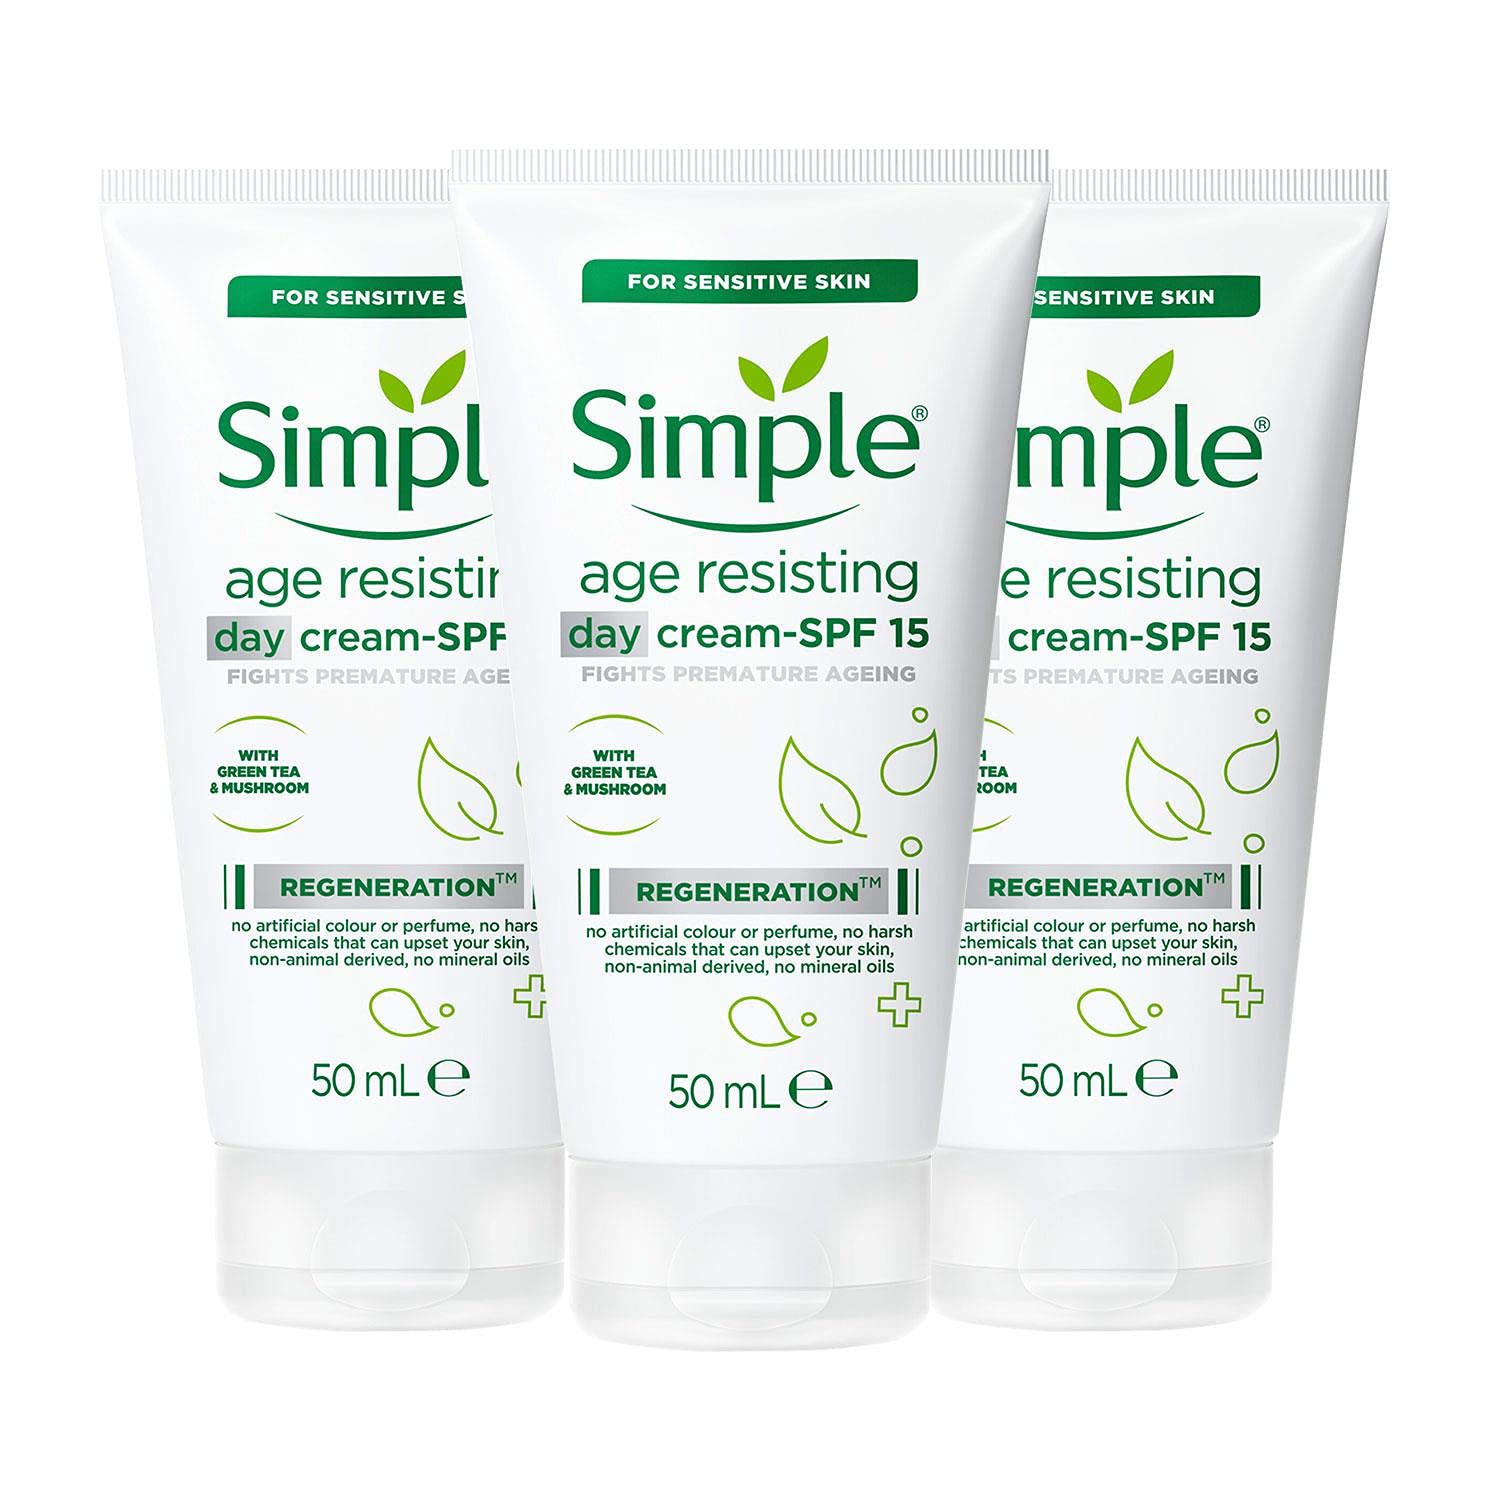 3 Pack of 50ml Simple Regeneration For Sensitive Skin Age Resisting Day Cream SPF 15 Fights Premature Ageing with Green Tea & Mushroom, No Artifical Colour or Perfume